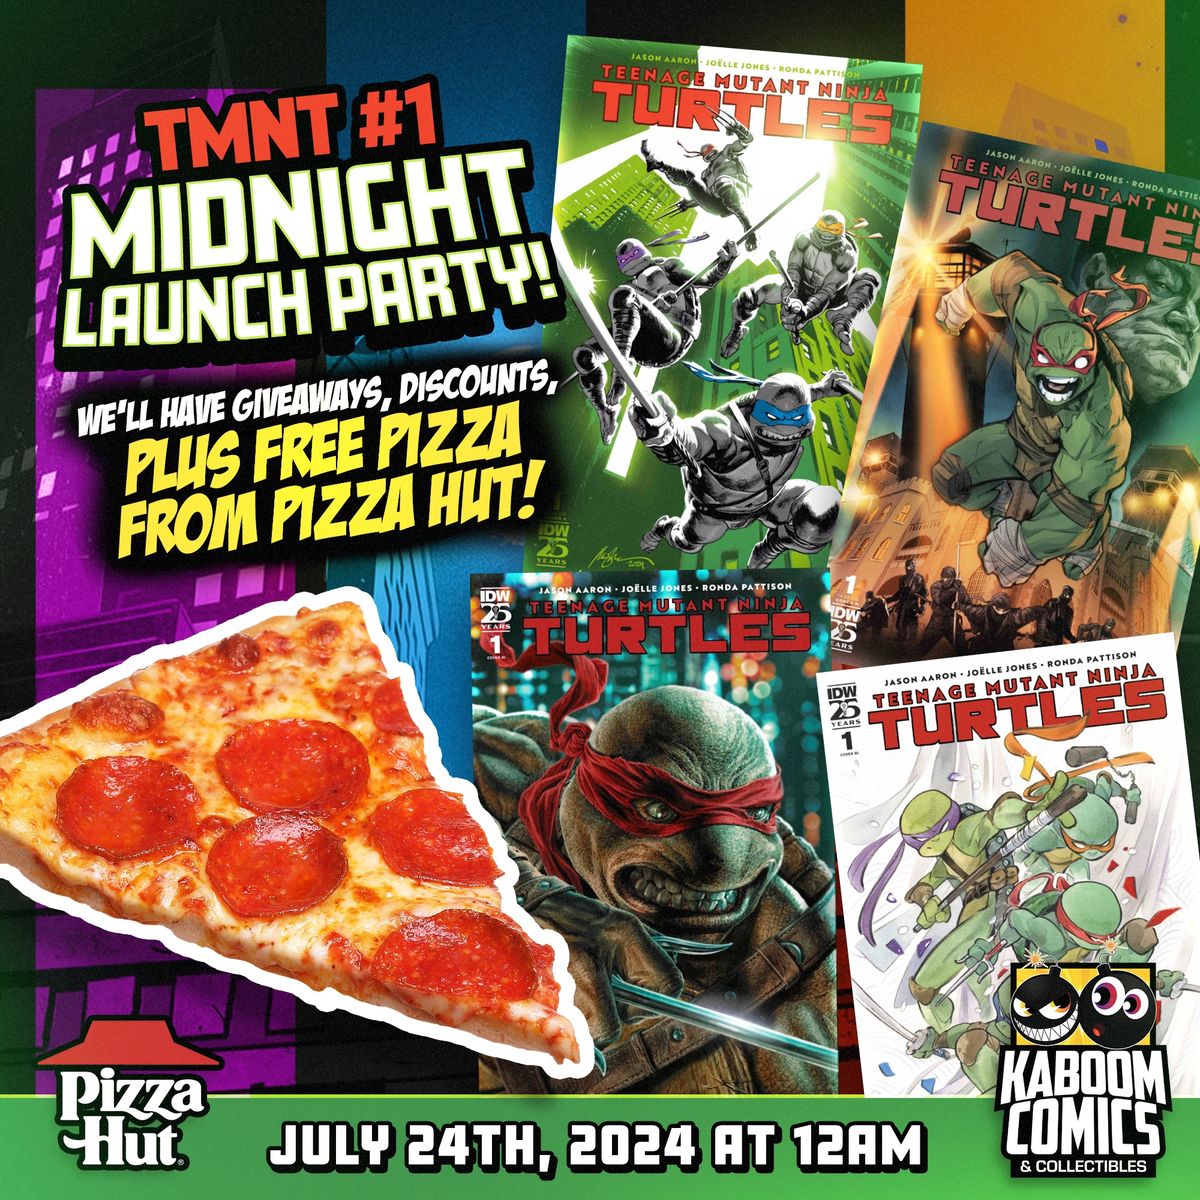 TMNT #1 Midnight Launch Party! 